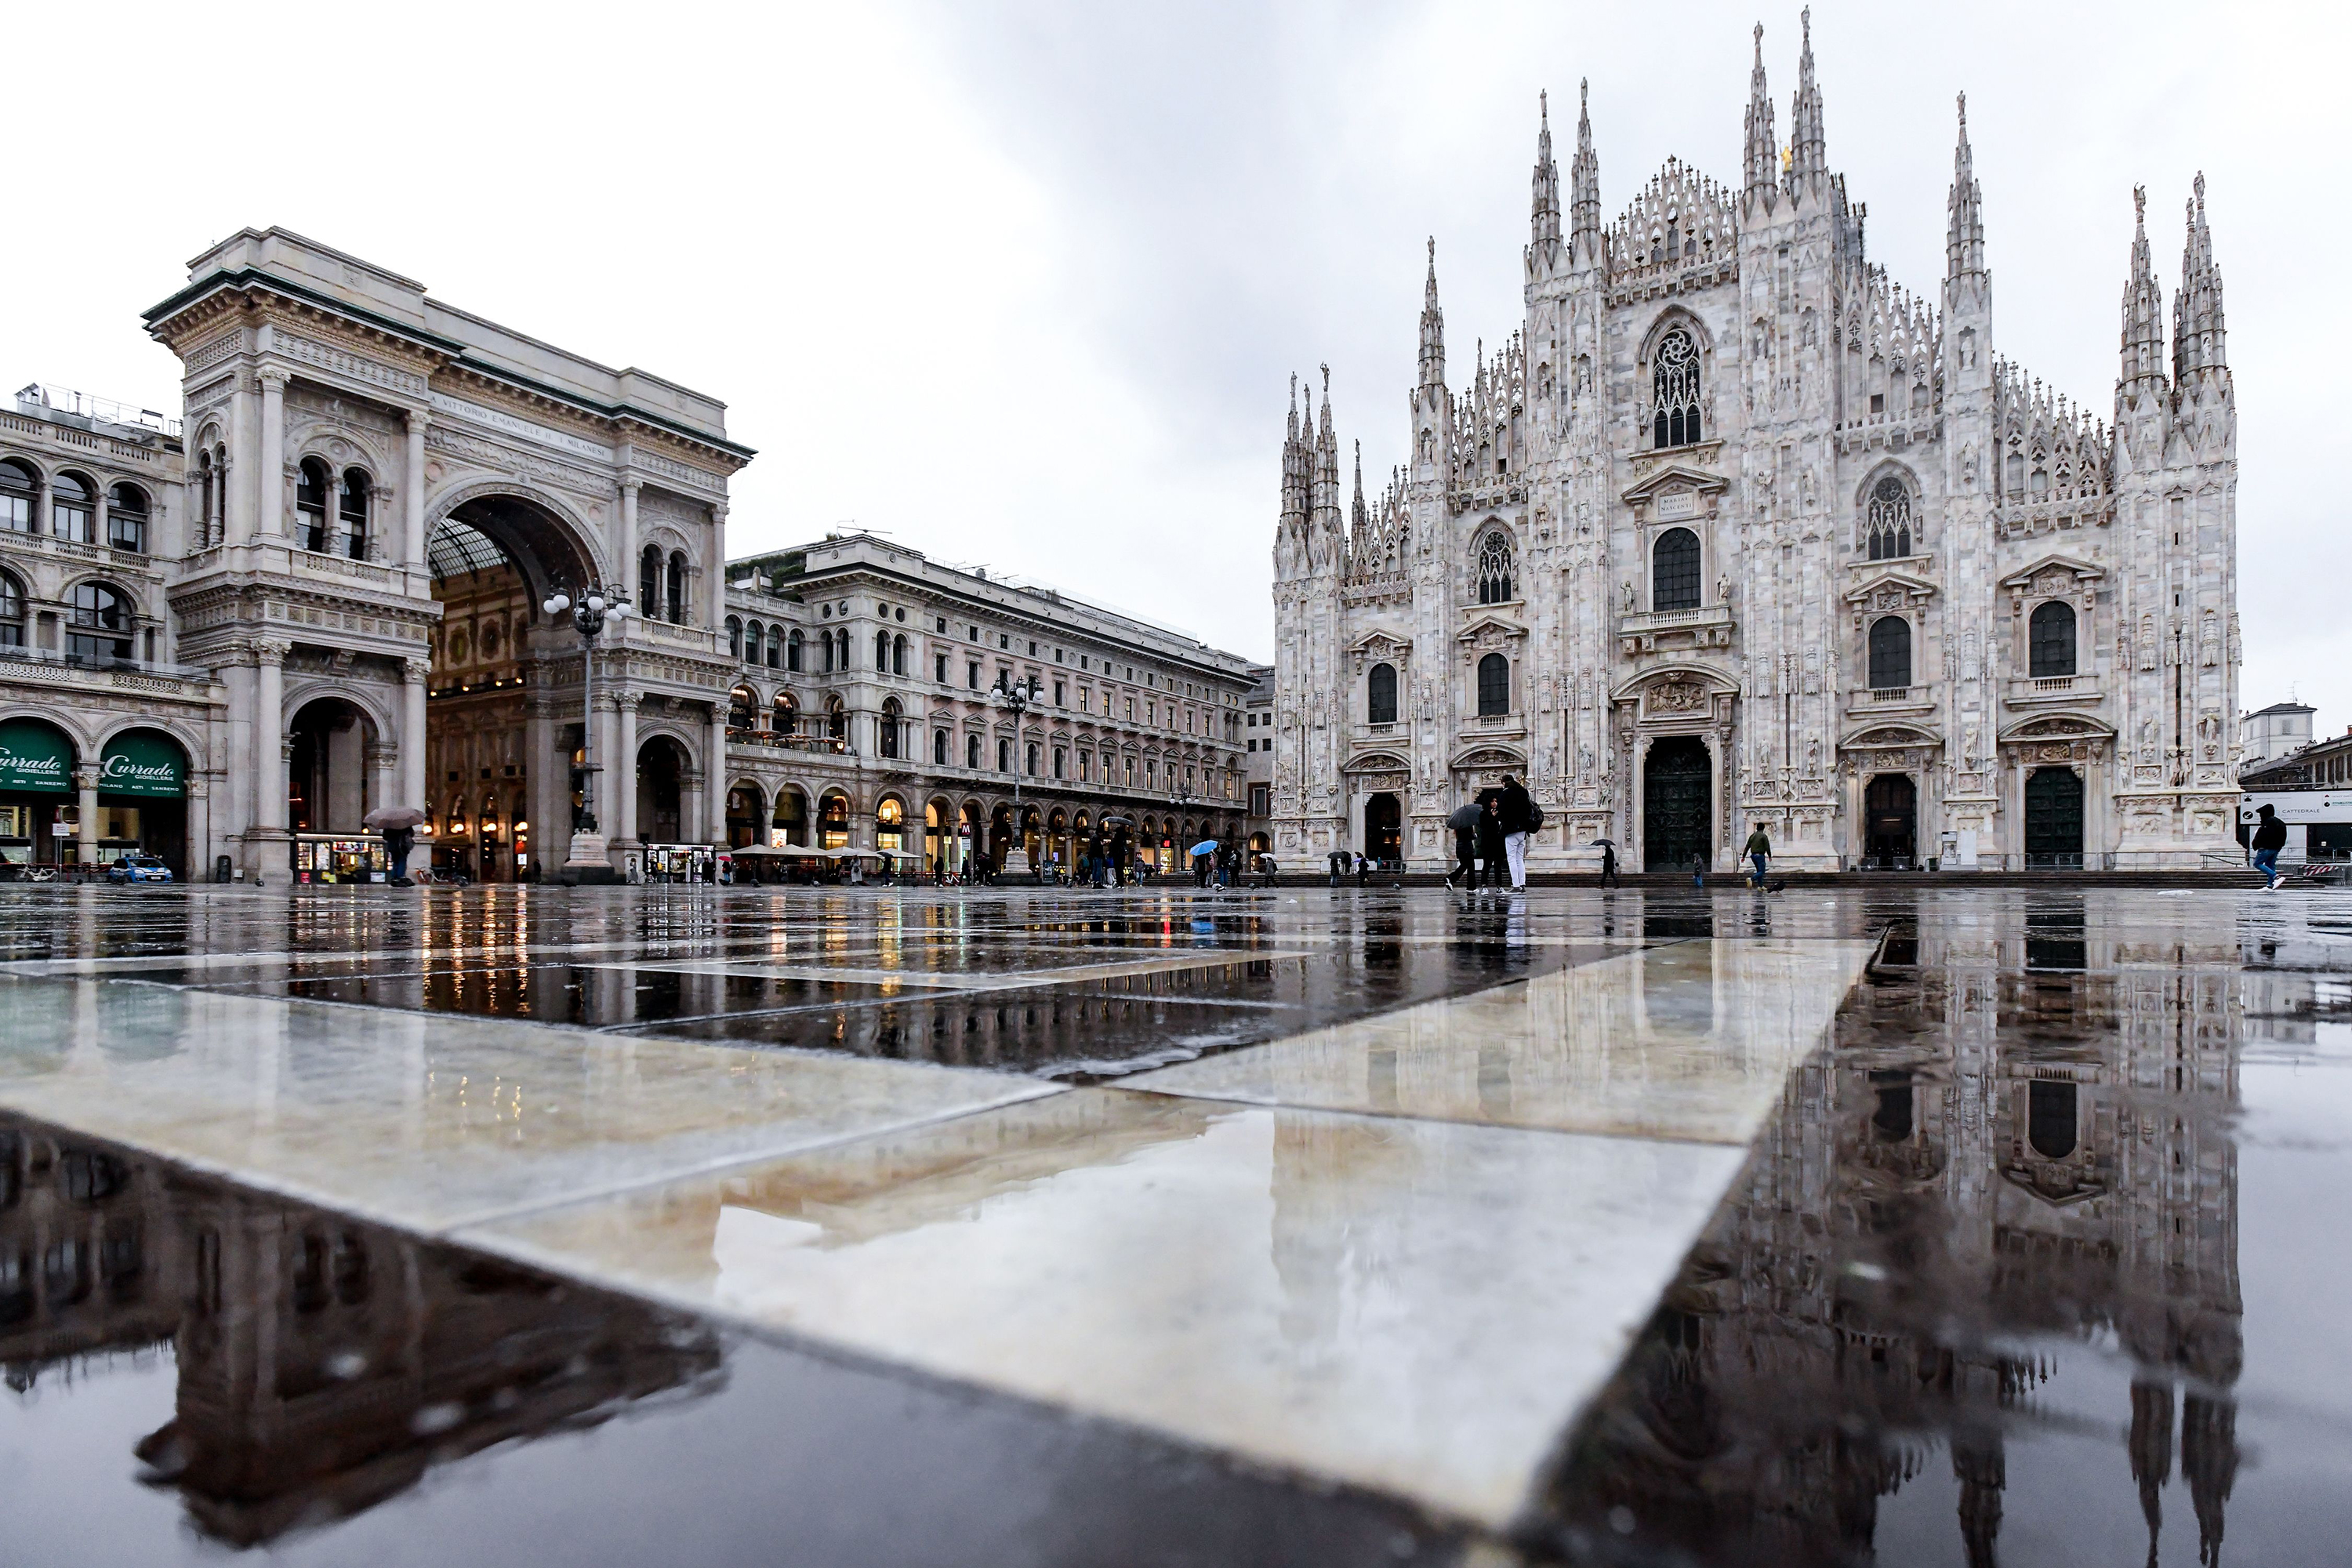 A deserted Piazza Duomo in Milan, Italy, on March 5, 2020.